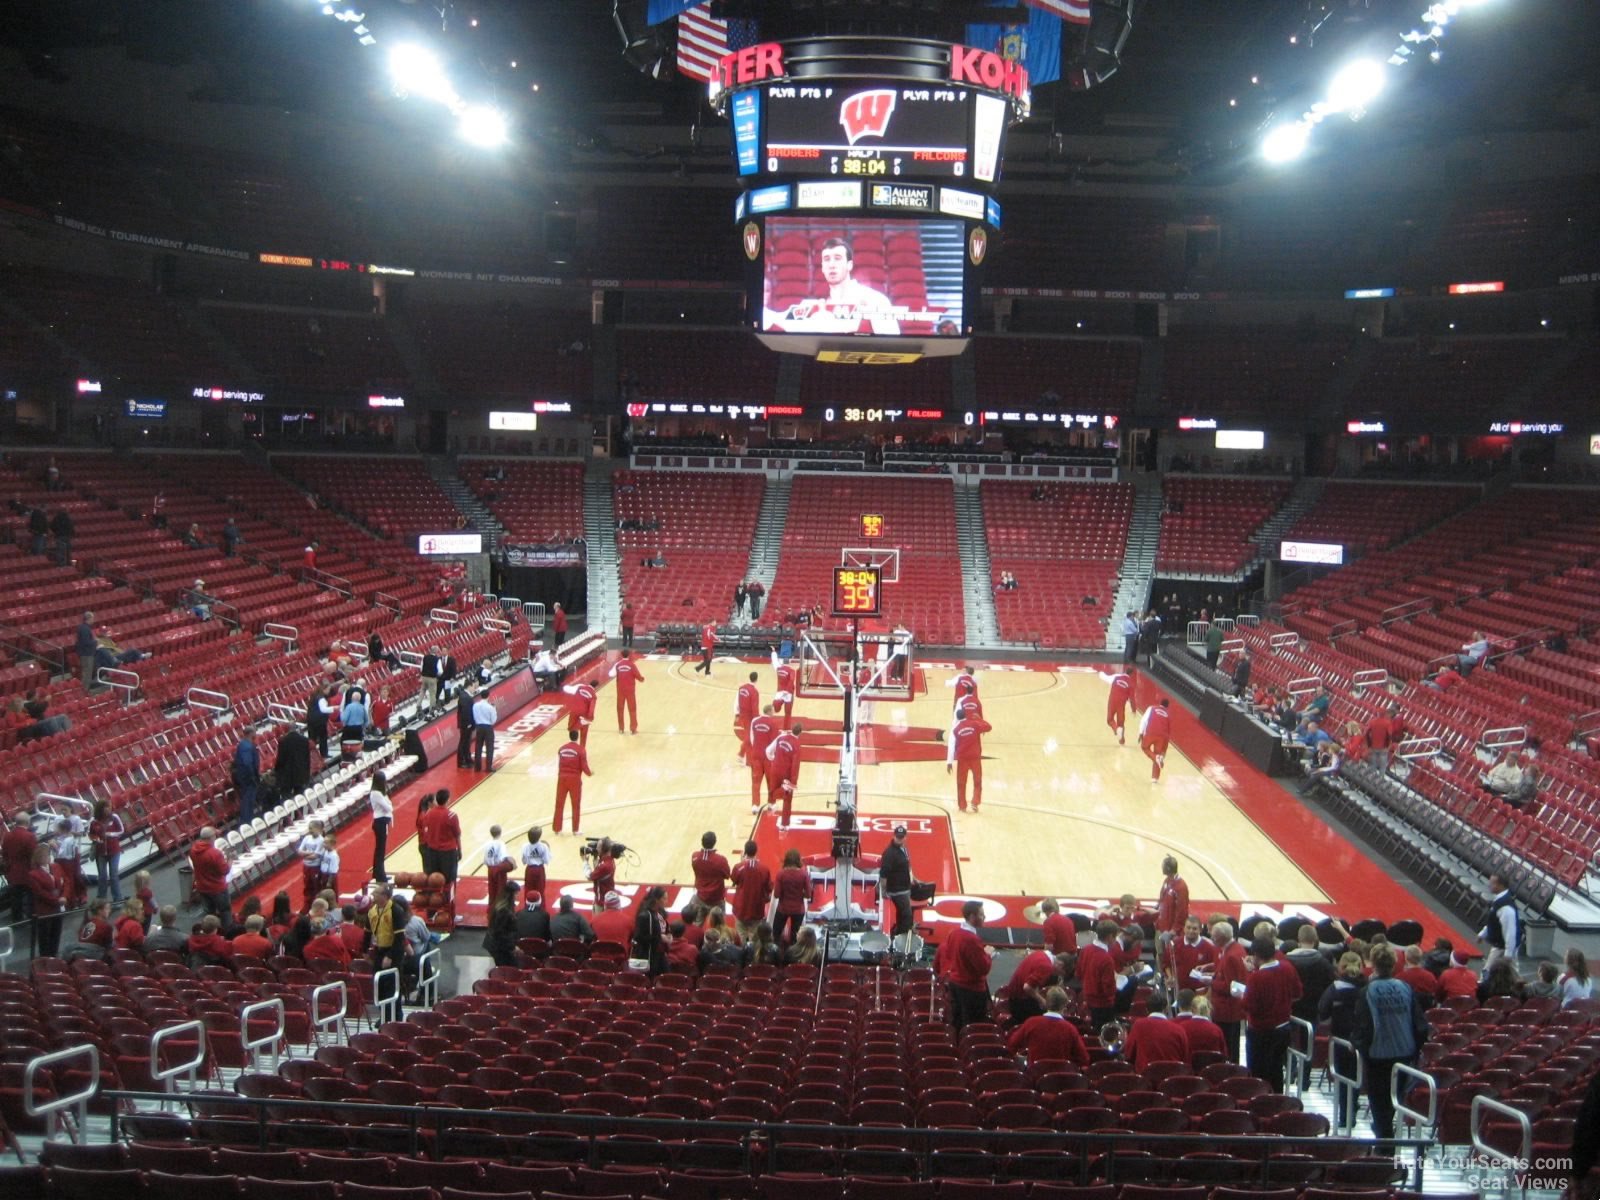 section 115 seat view  - kohl center